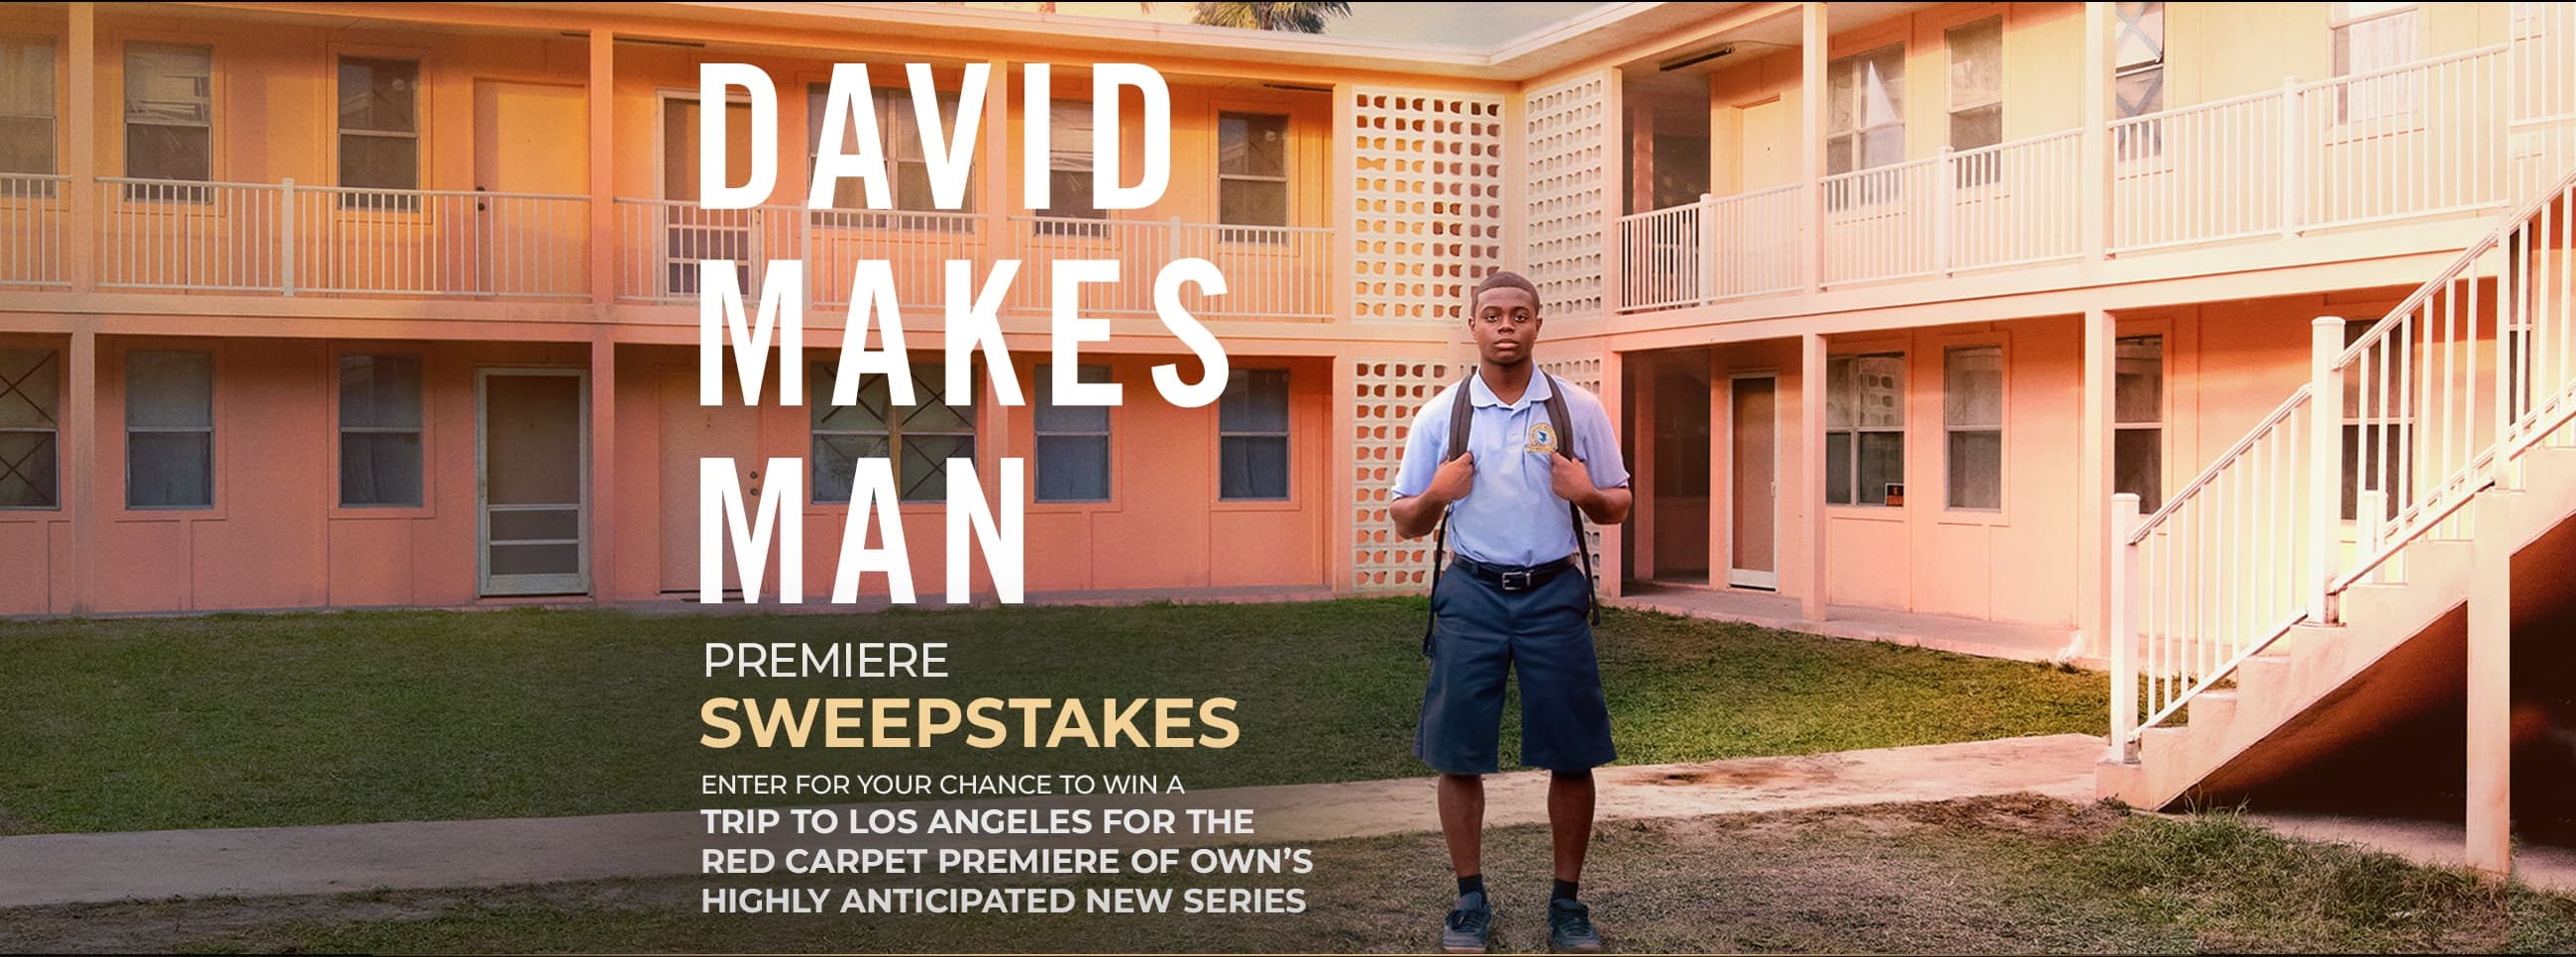 Dave Makes Man Sweepstakes Code Word - Winzily2600 x 966